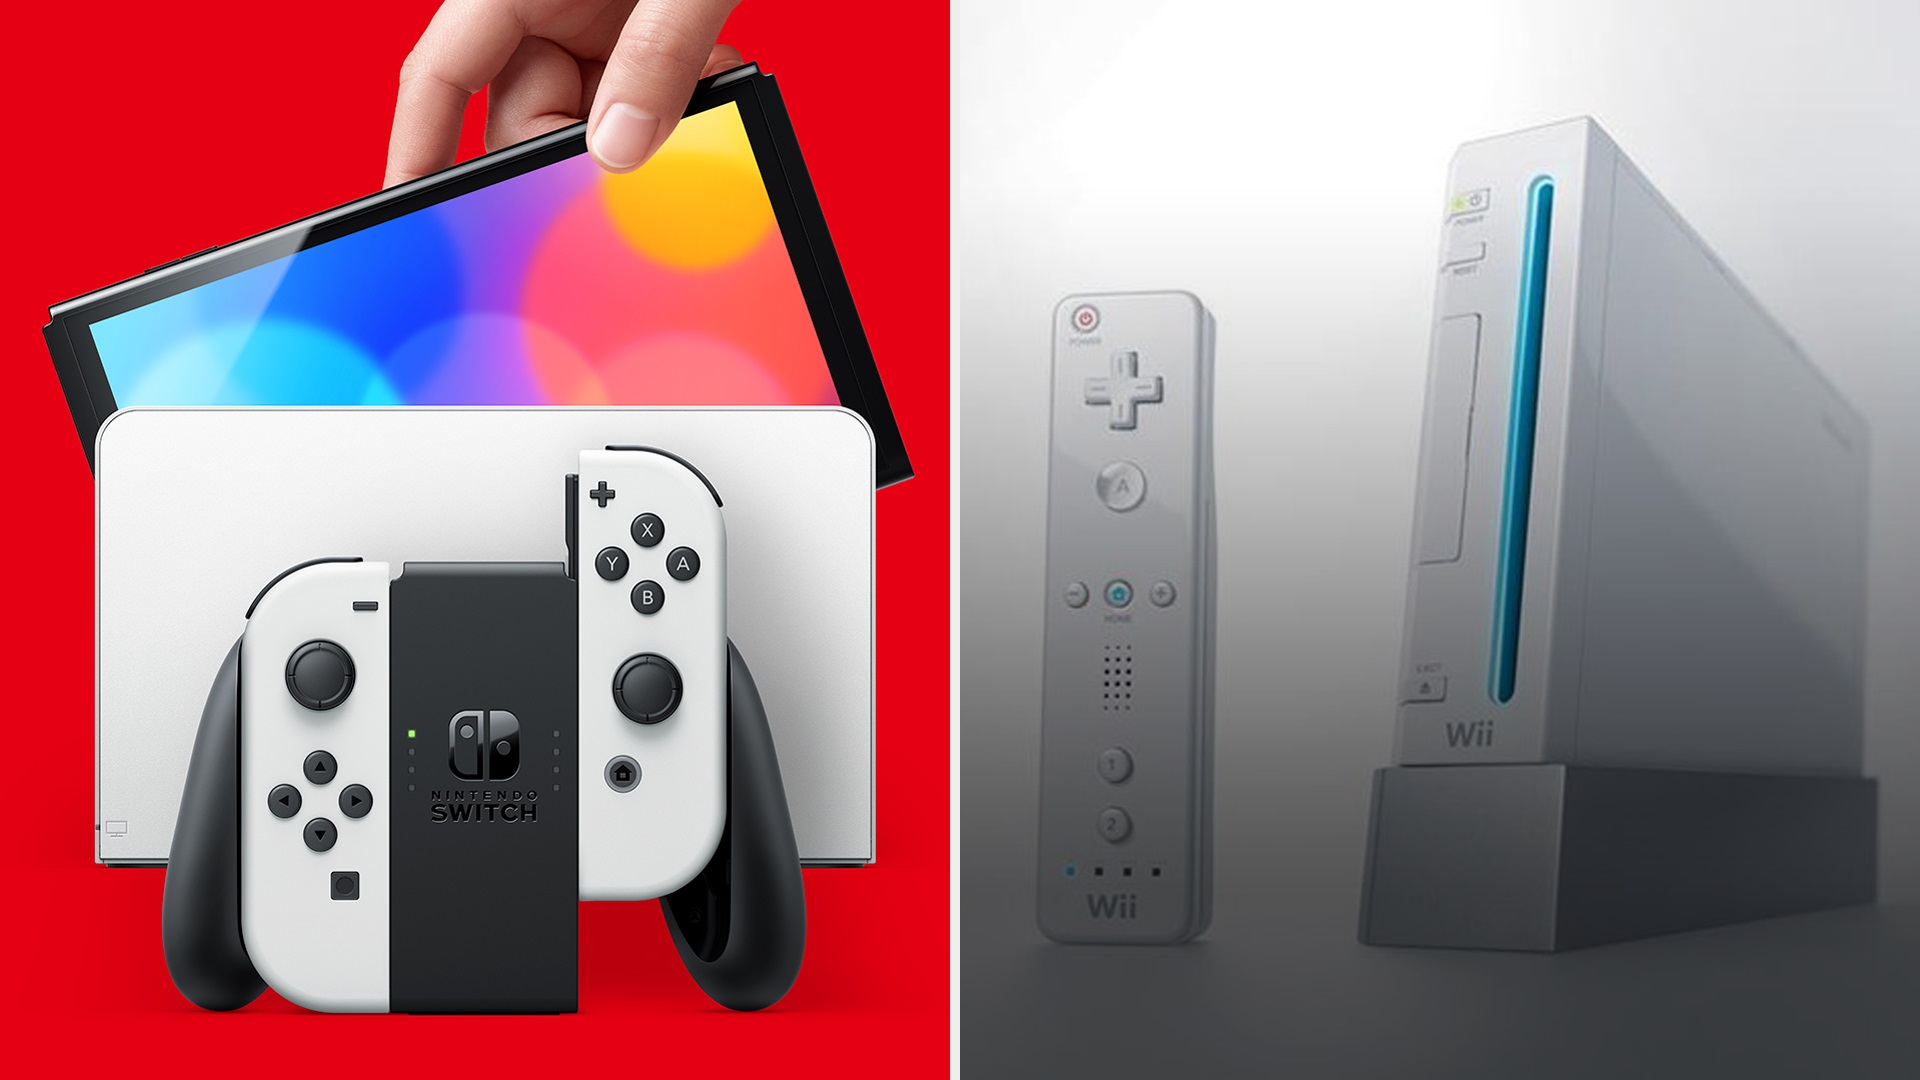 Nintendo Switch Sales Have Beaten Wii U Worldwide In Less Than A